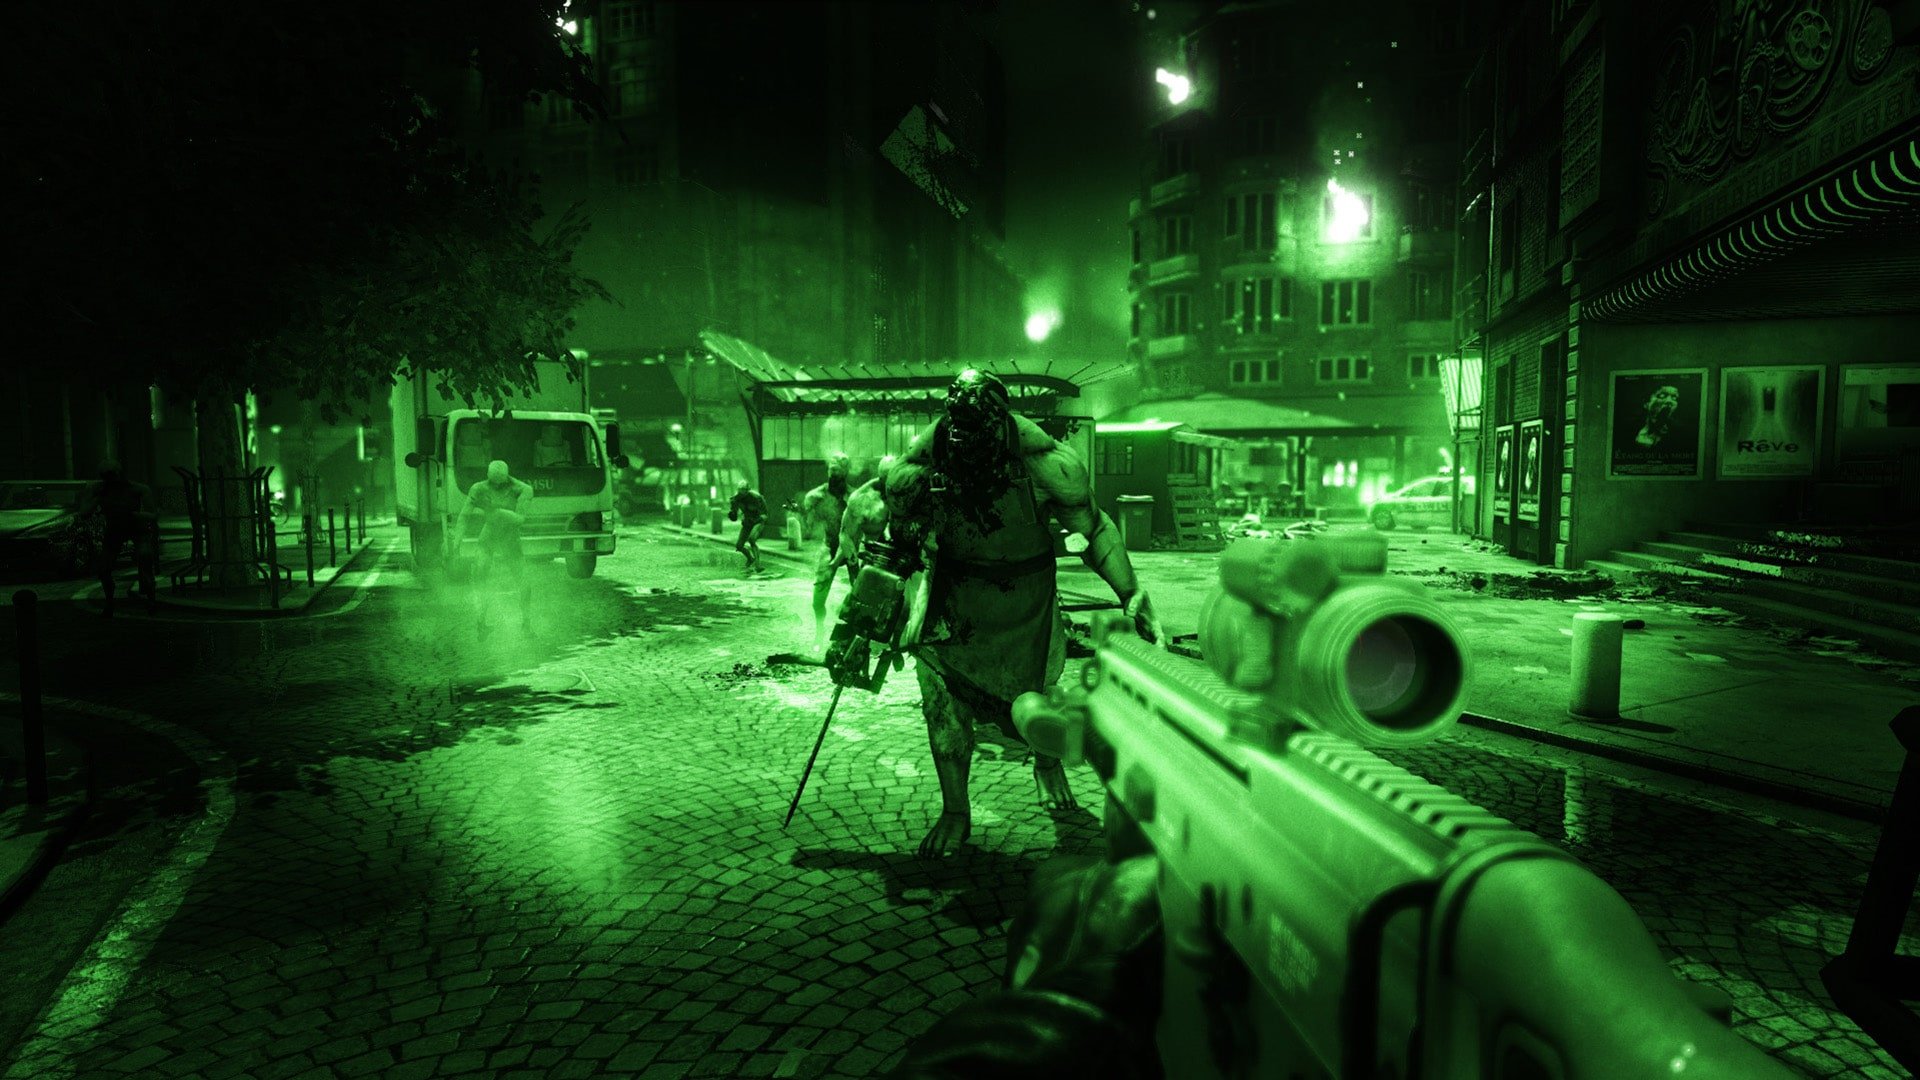 killing floor 2 night vision multiplayer mission chainsaw zombie